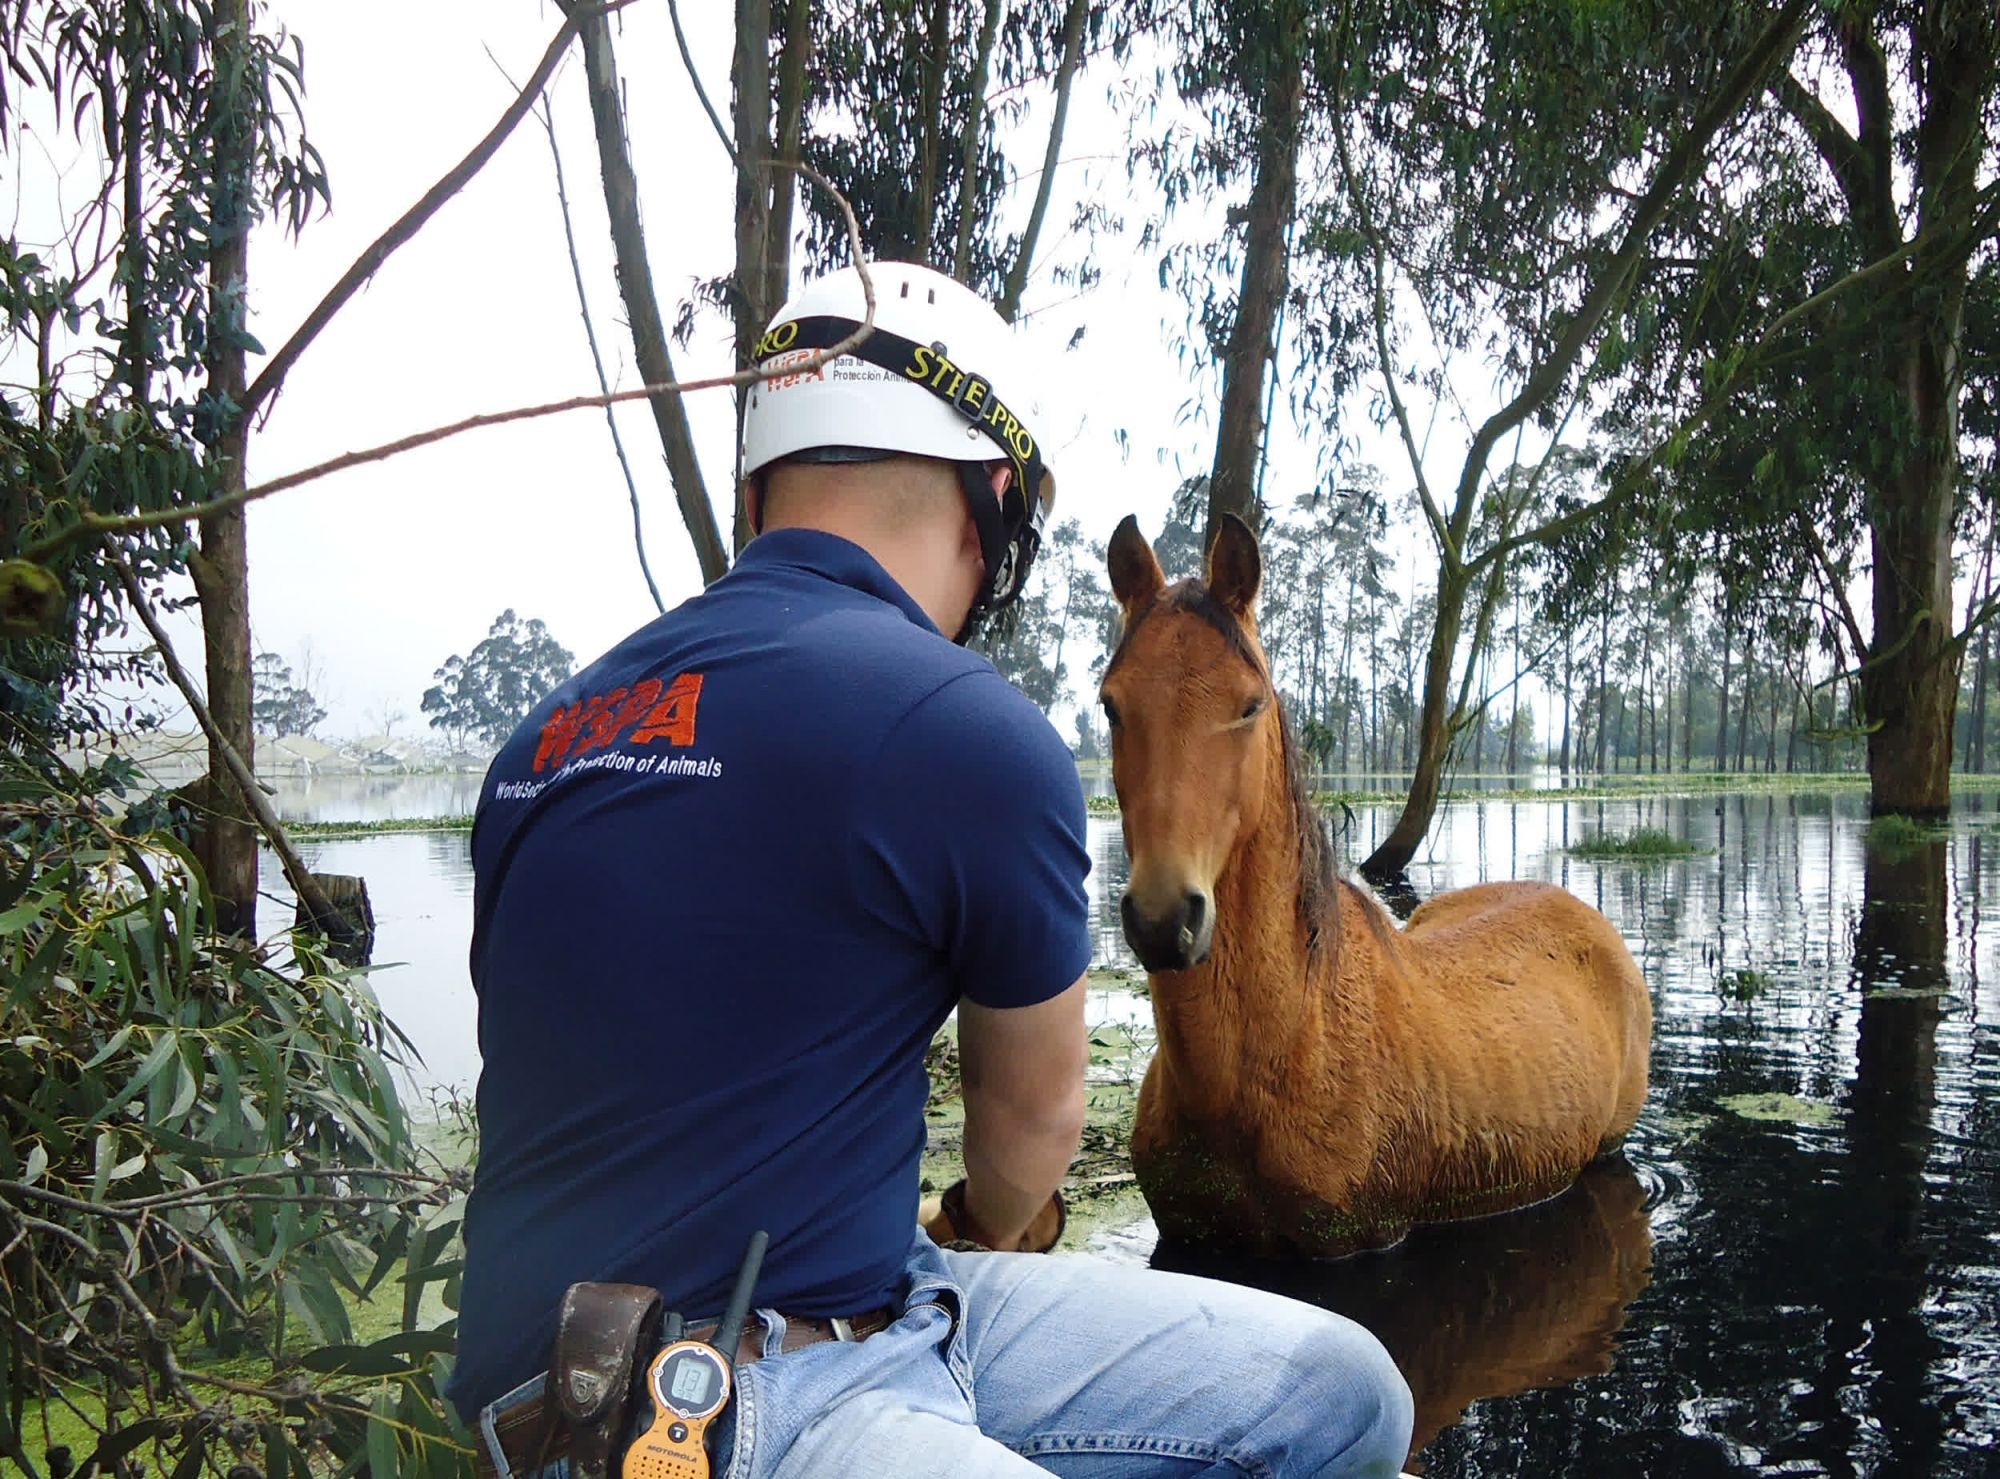 Heavy rains caused some of the worst flooding in Colombia in 2011. In Mosquera, after evacuation some horses were left in floodwater and needed to be rescued. The horses were treated and taken to a farm to find their owners or be re-homed.